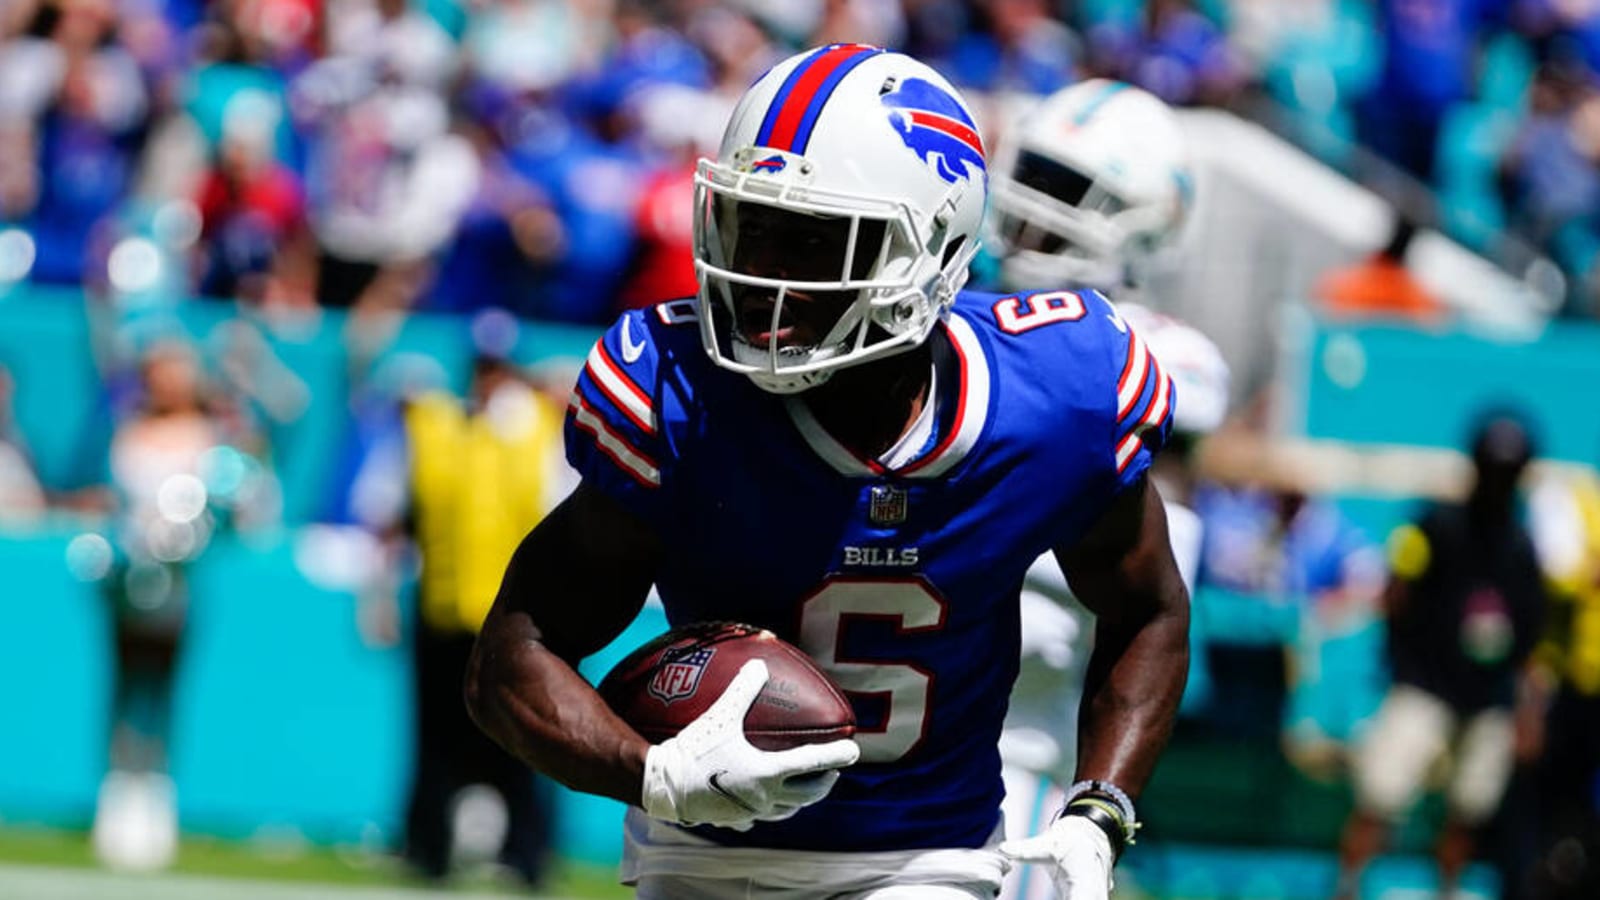 Bills Isaiah McKenzie says he was temporarily paralyzed after hit in Week 4